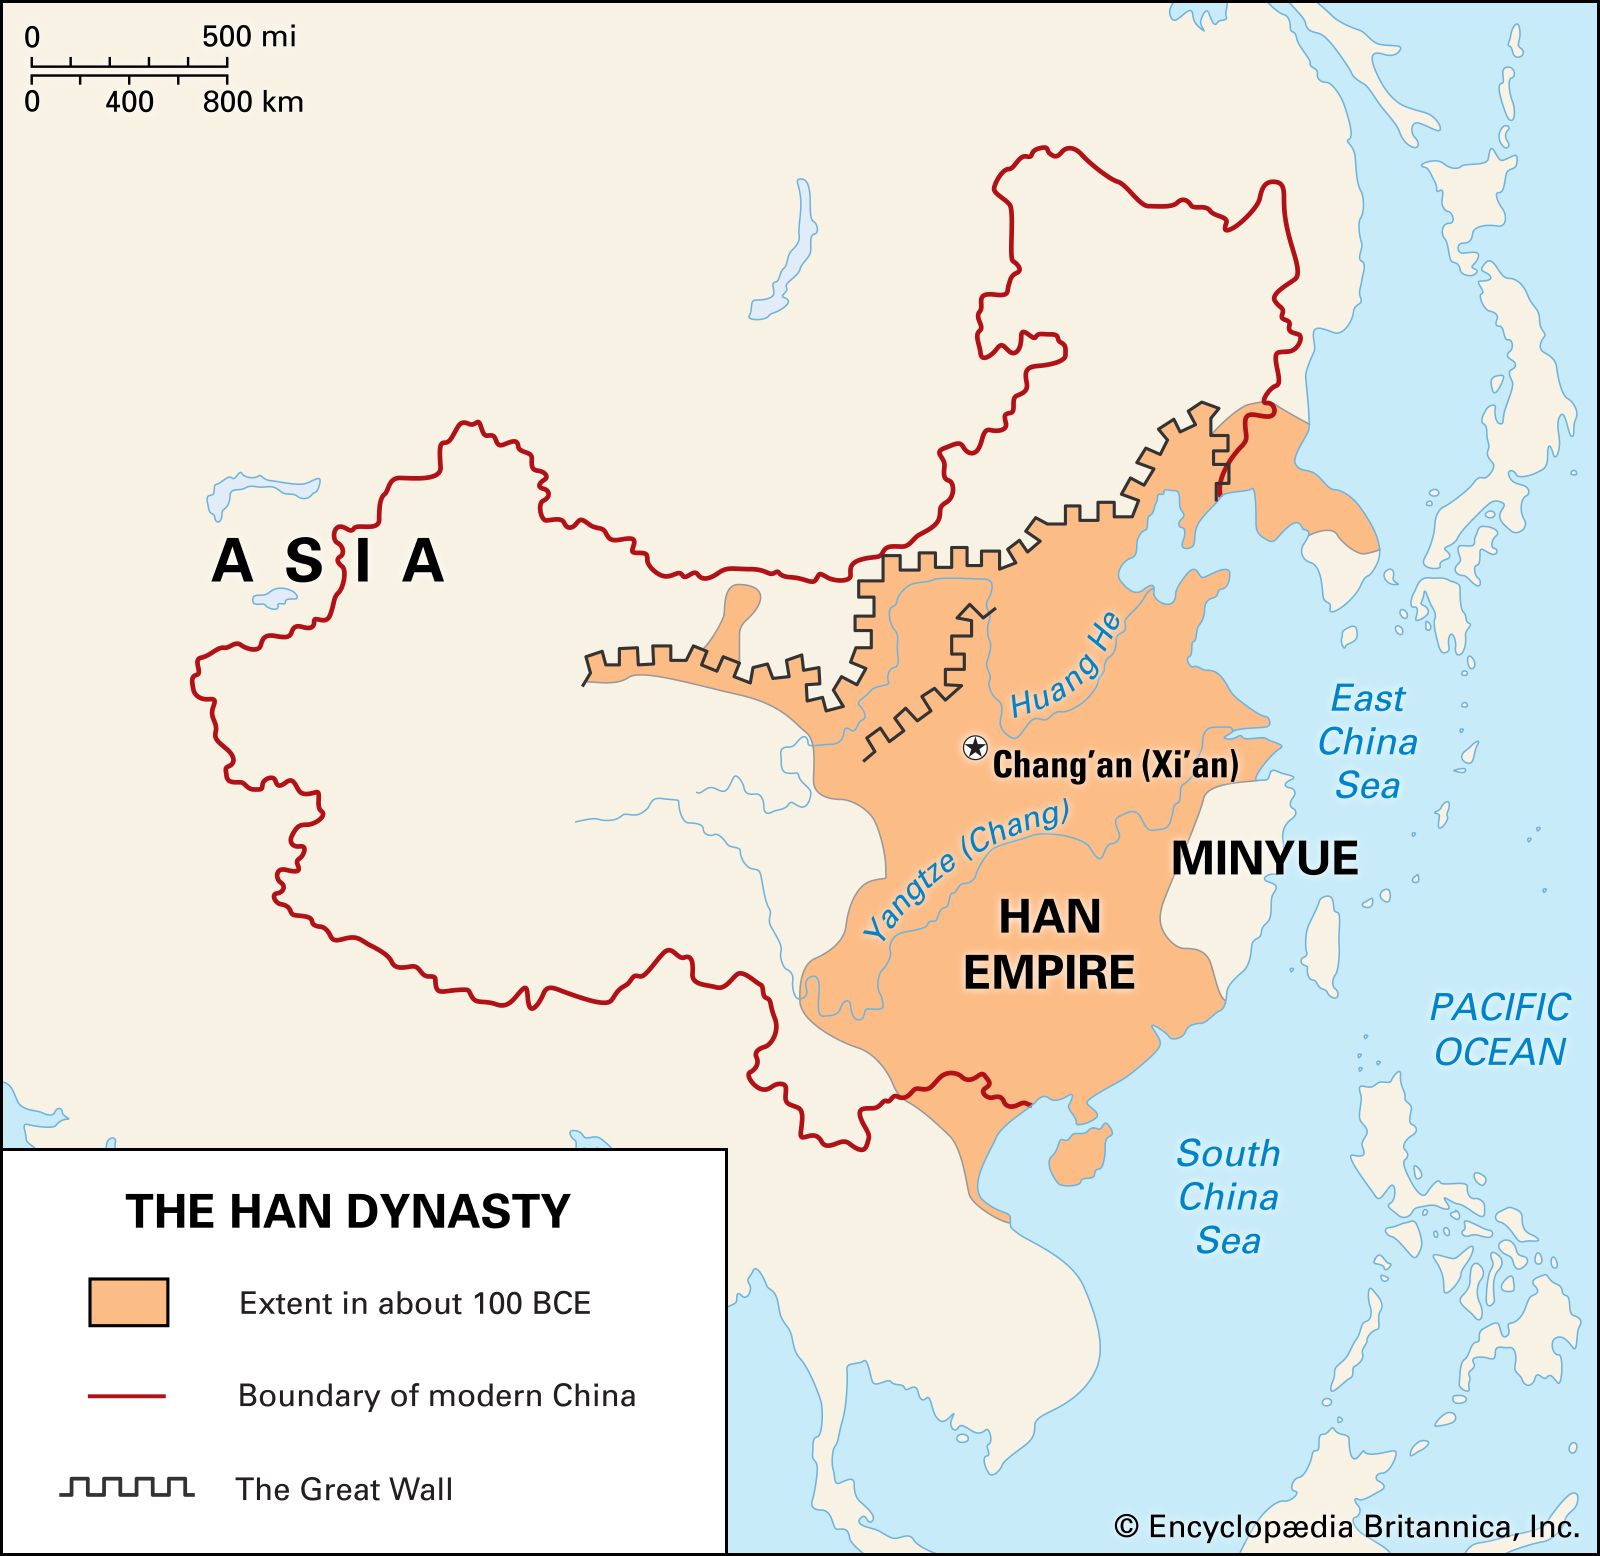 When Did The Han Dynasty Rule Ancient China